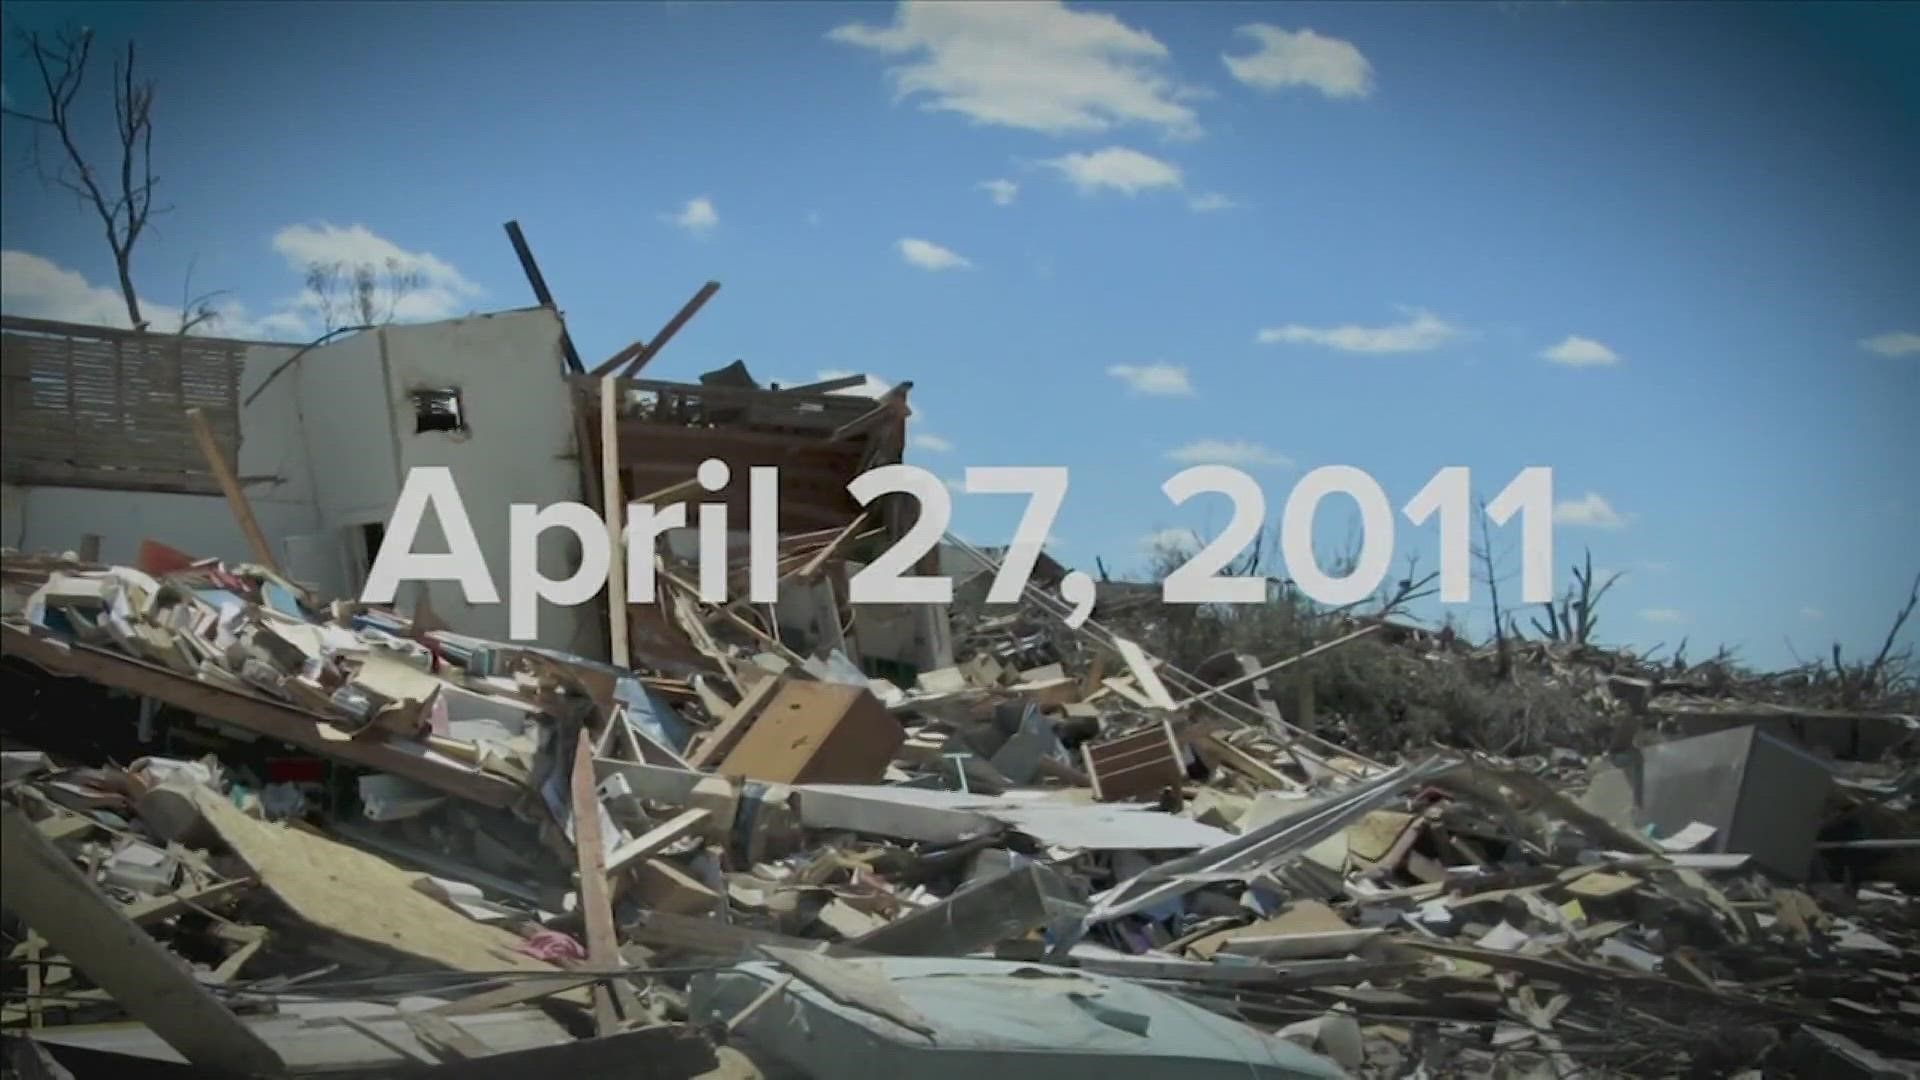 WZDX News talks with people whose lives were changed forever by the tornado outbreak in Alabama on April 27, 2011.